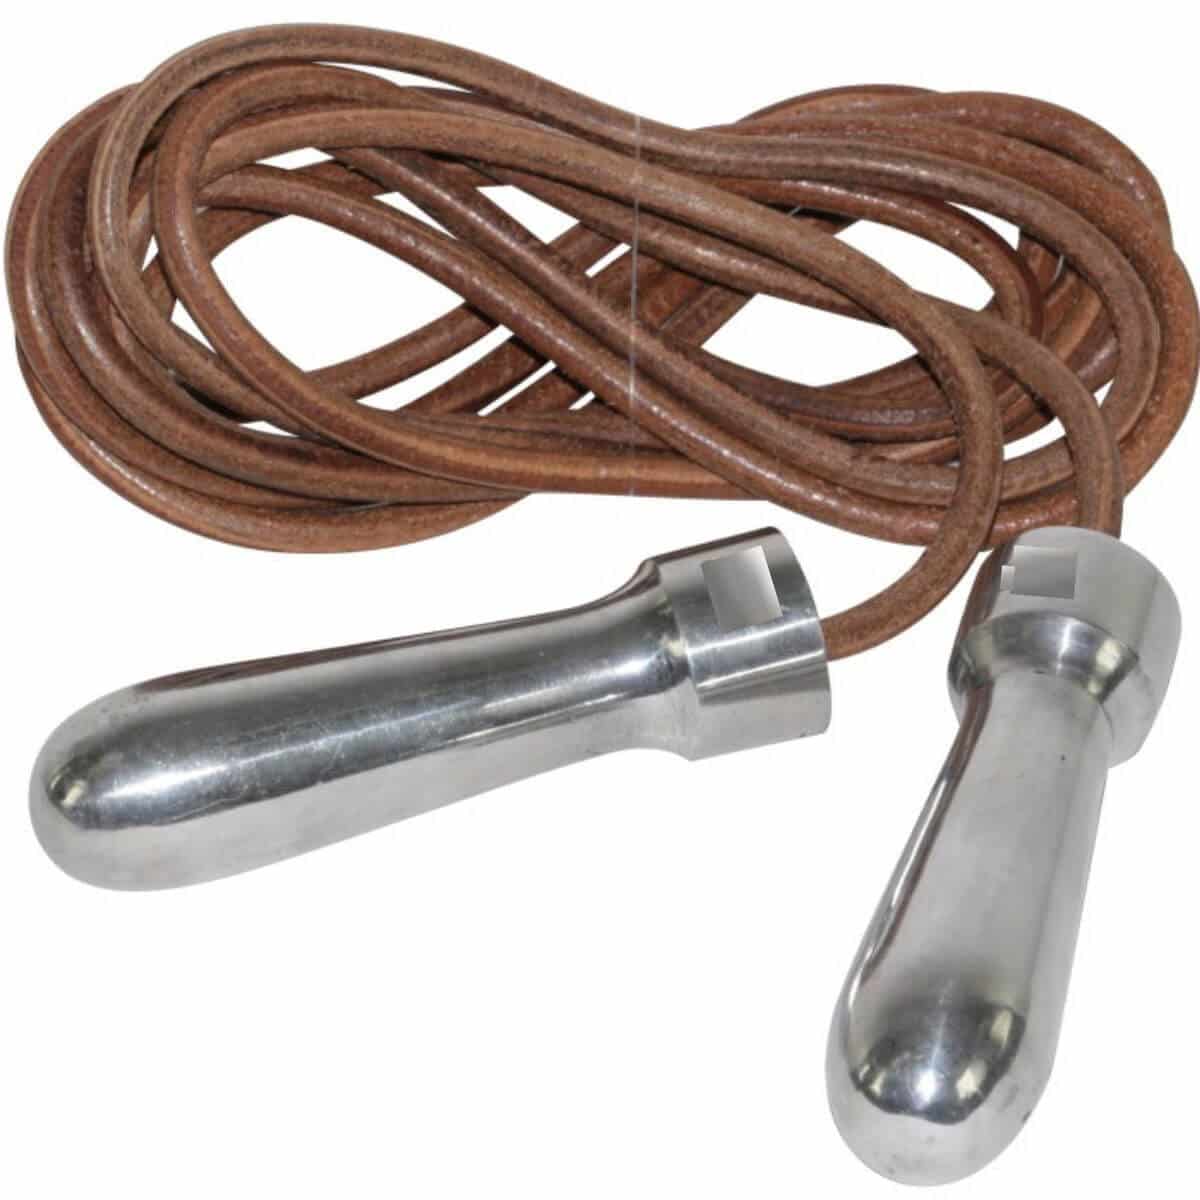 Xpeed XP809 Leather Skipping Rope With Aluminum Handles